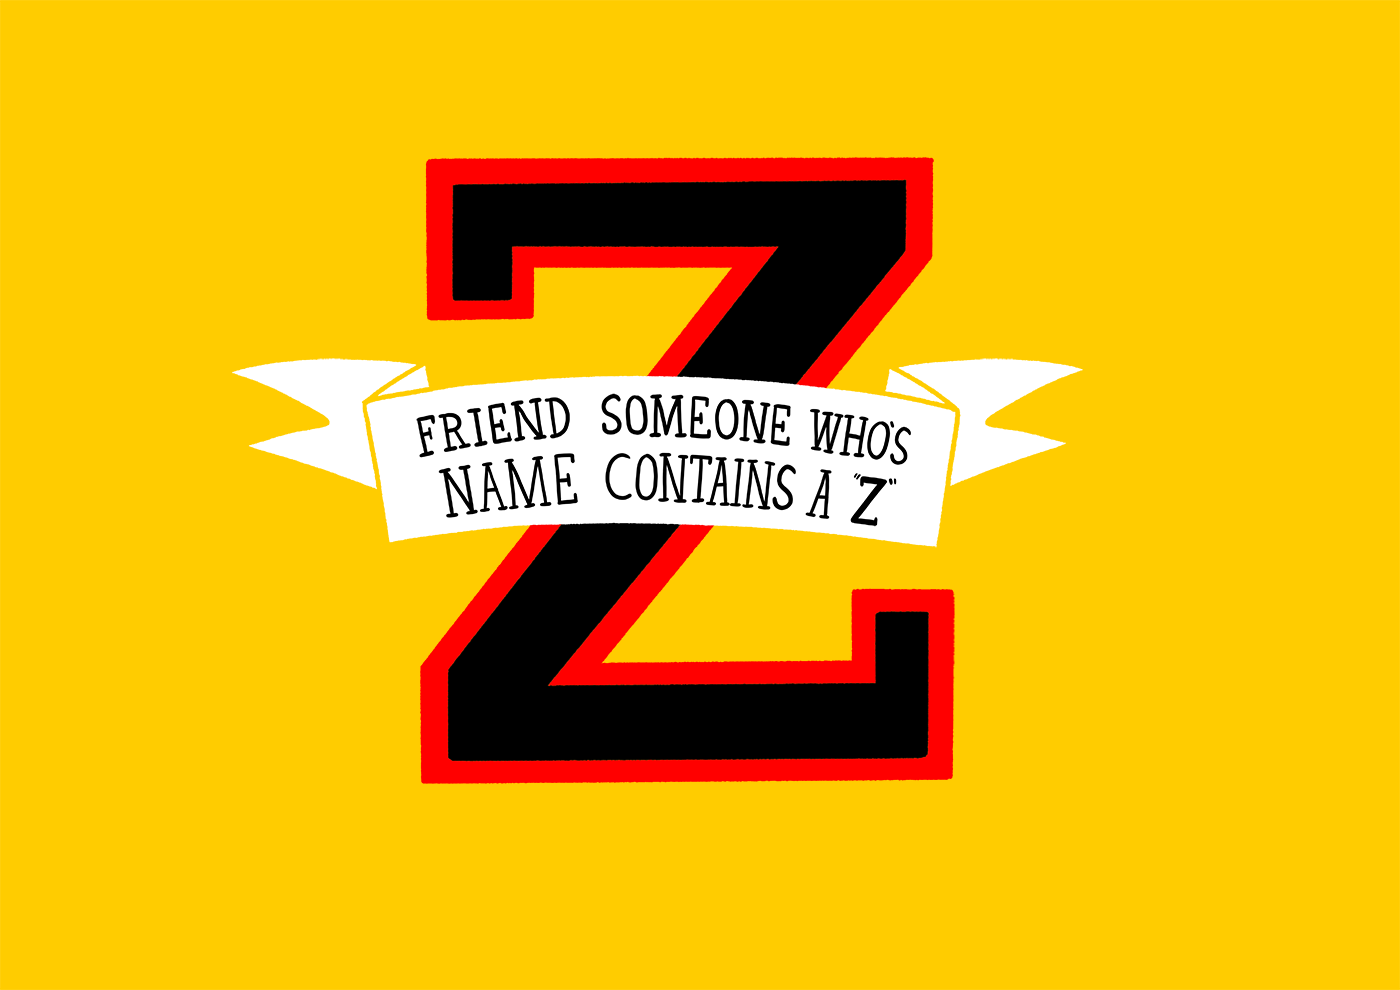 Friend someone who s name contains a z